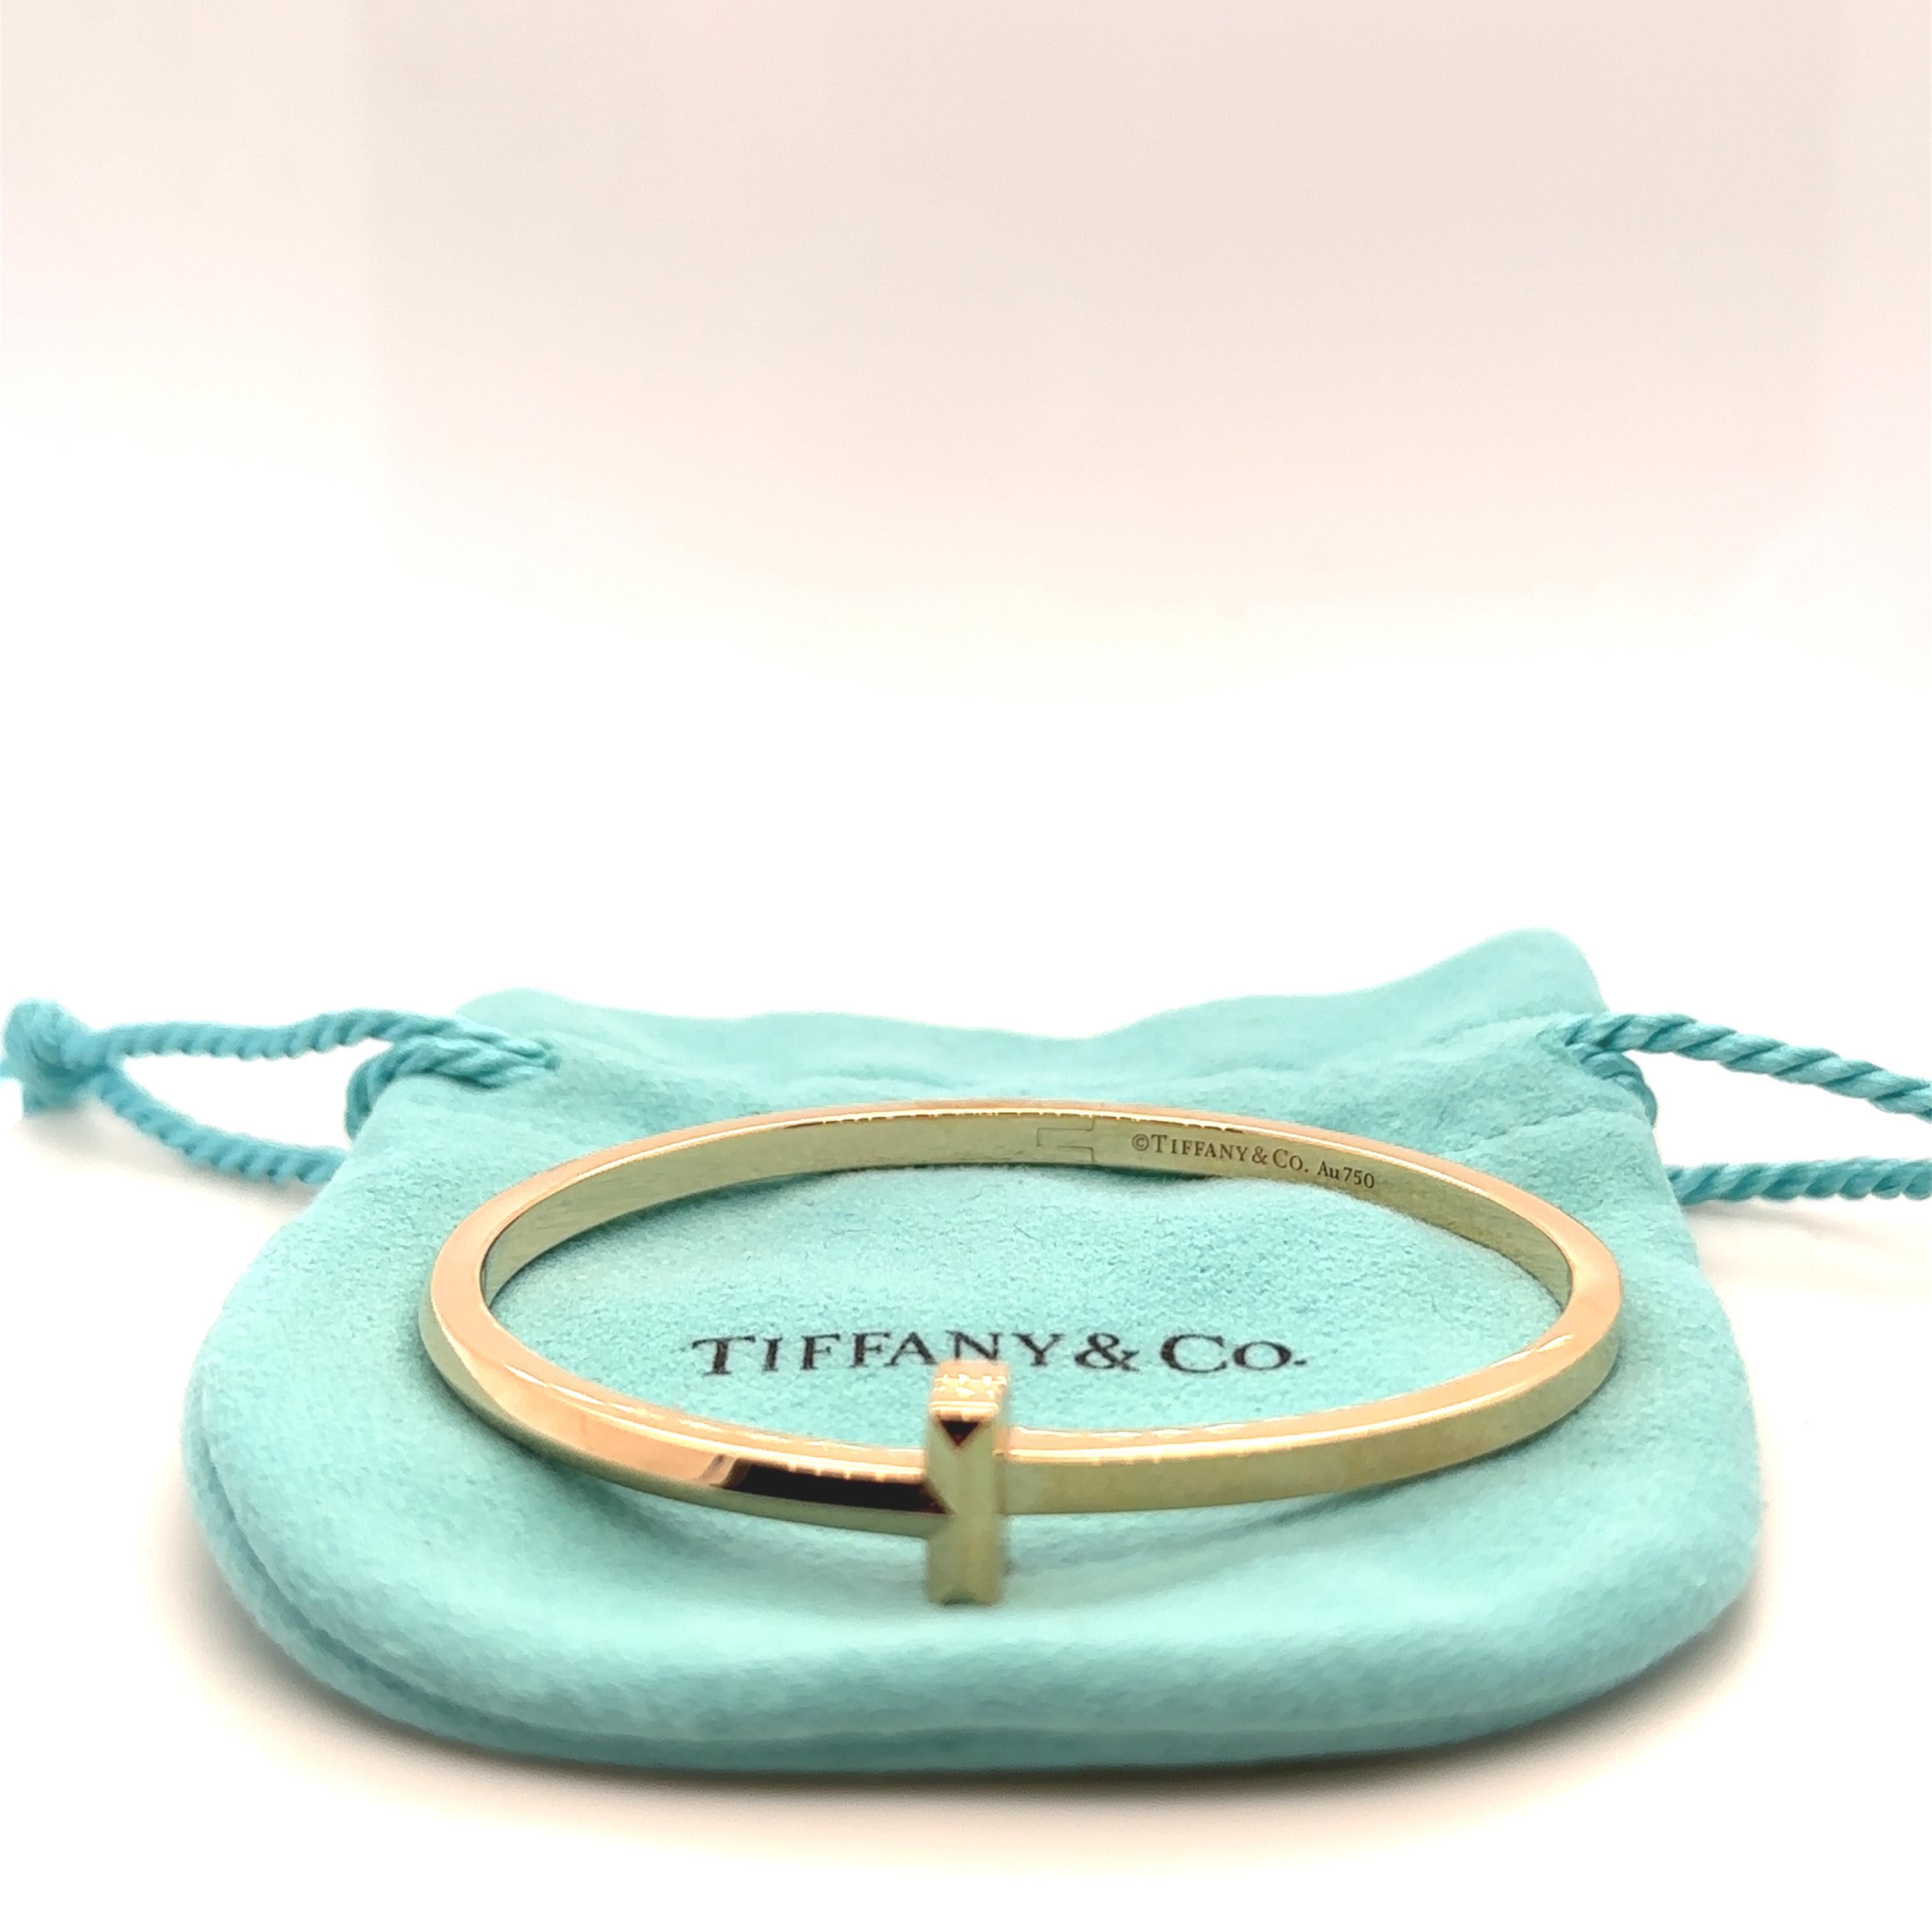 Tiffany & Co T T1 Hinged Bangle in Rose Gold 5